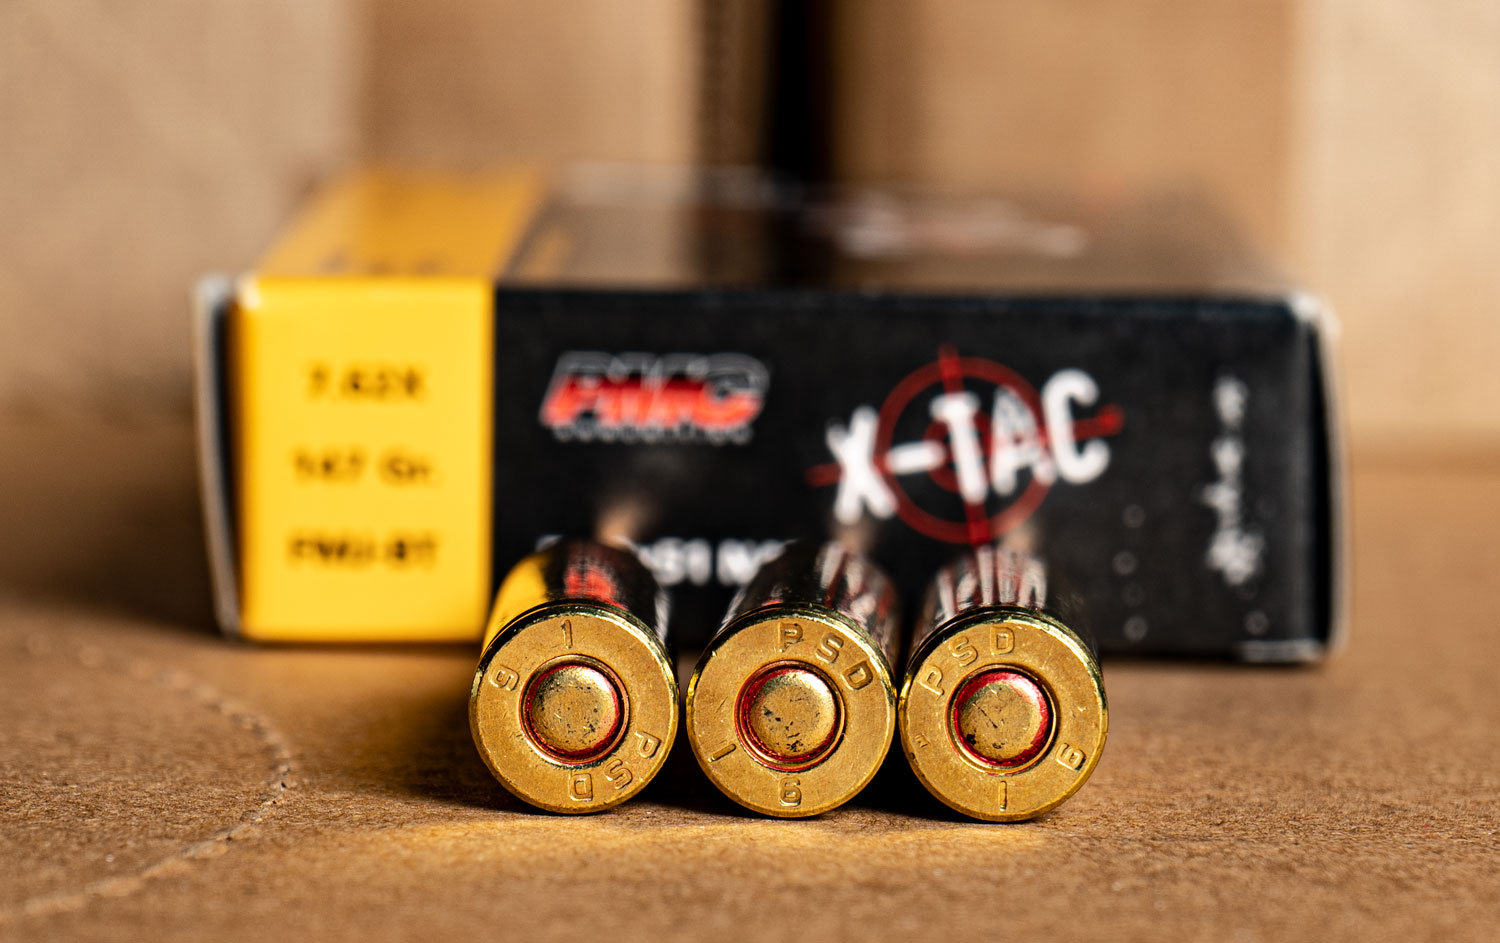 PMC X-TAC rifle ammo box with cartridges on a table